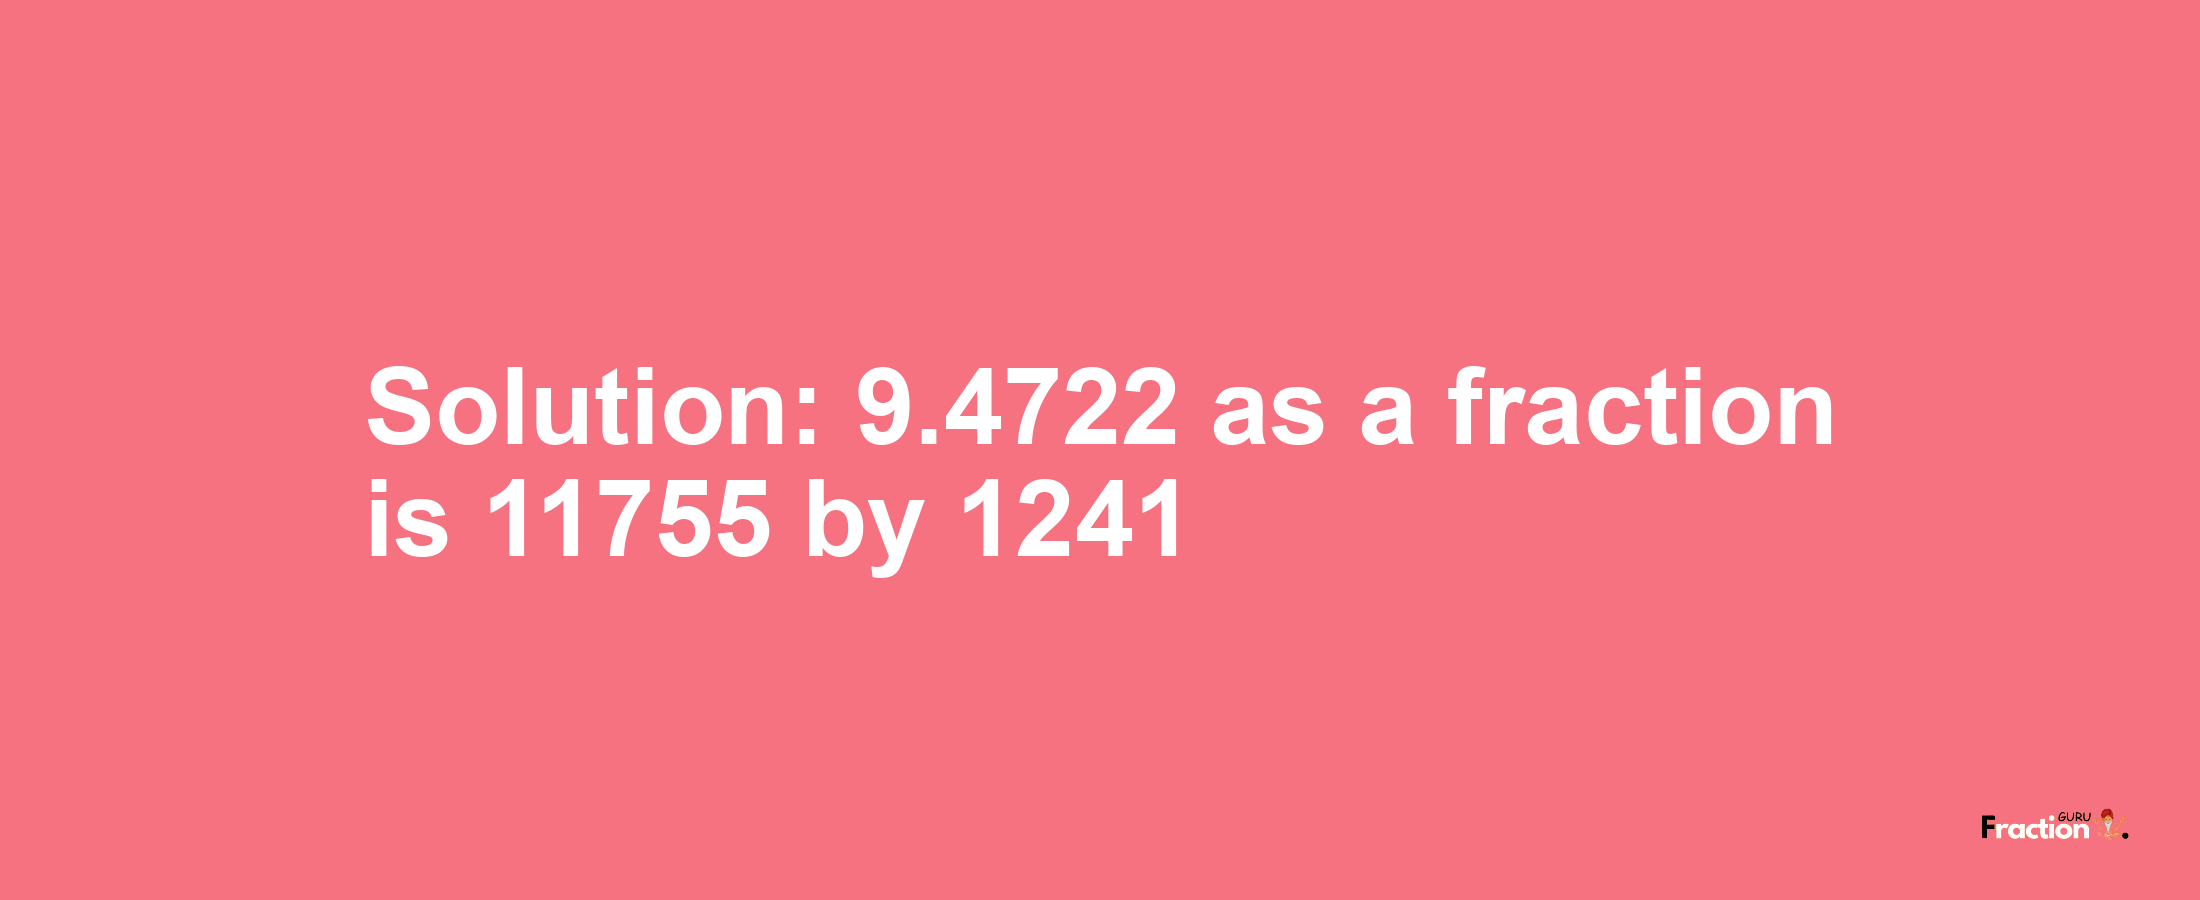 Solution:9.4722 as a fraction is 11755/1241